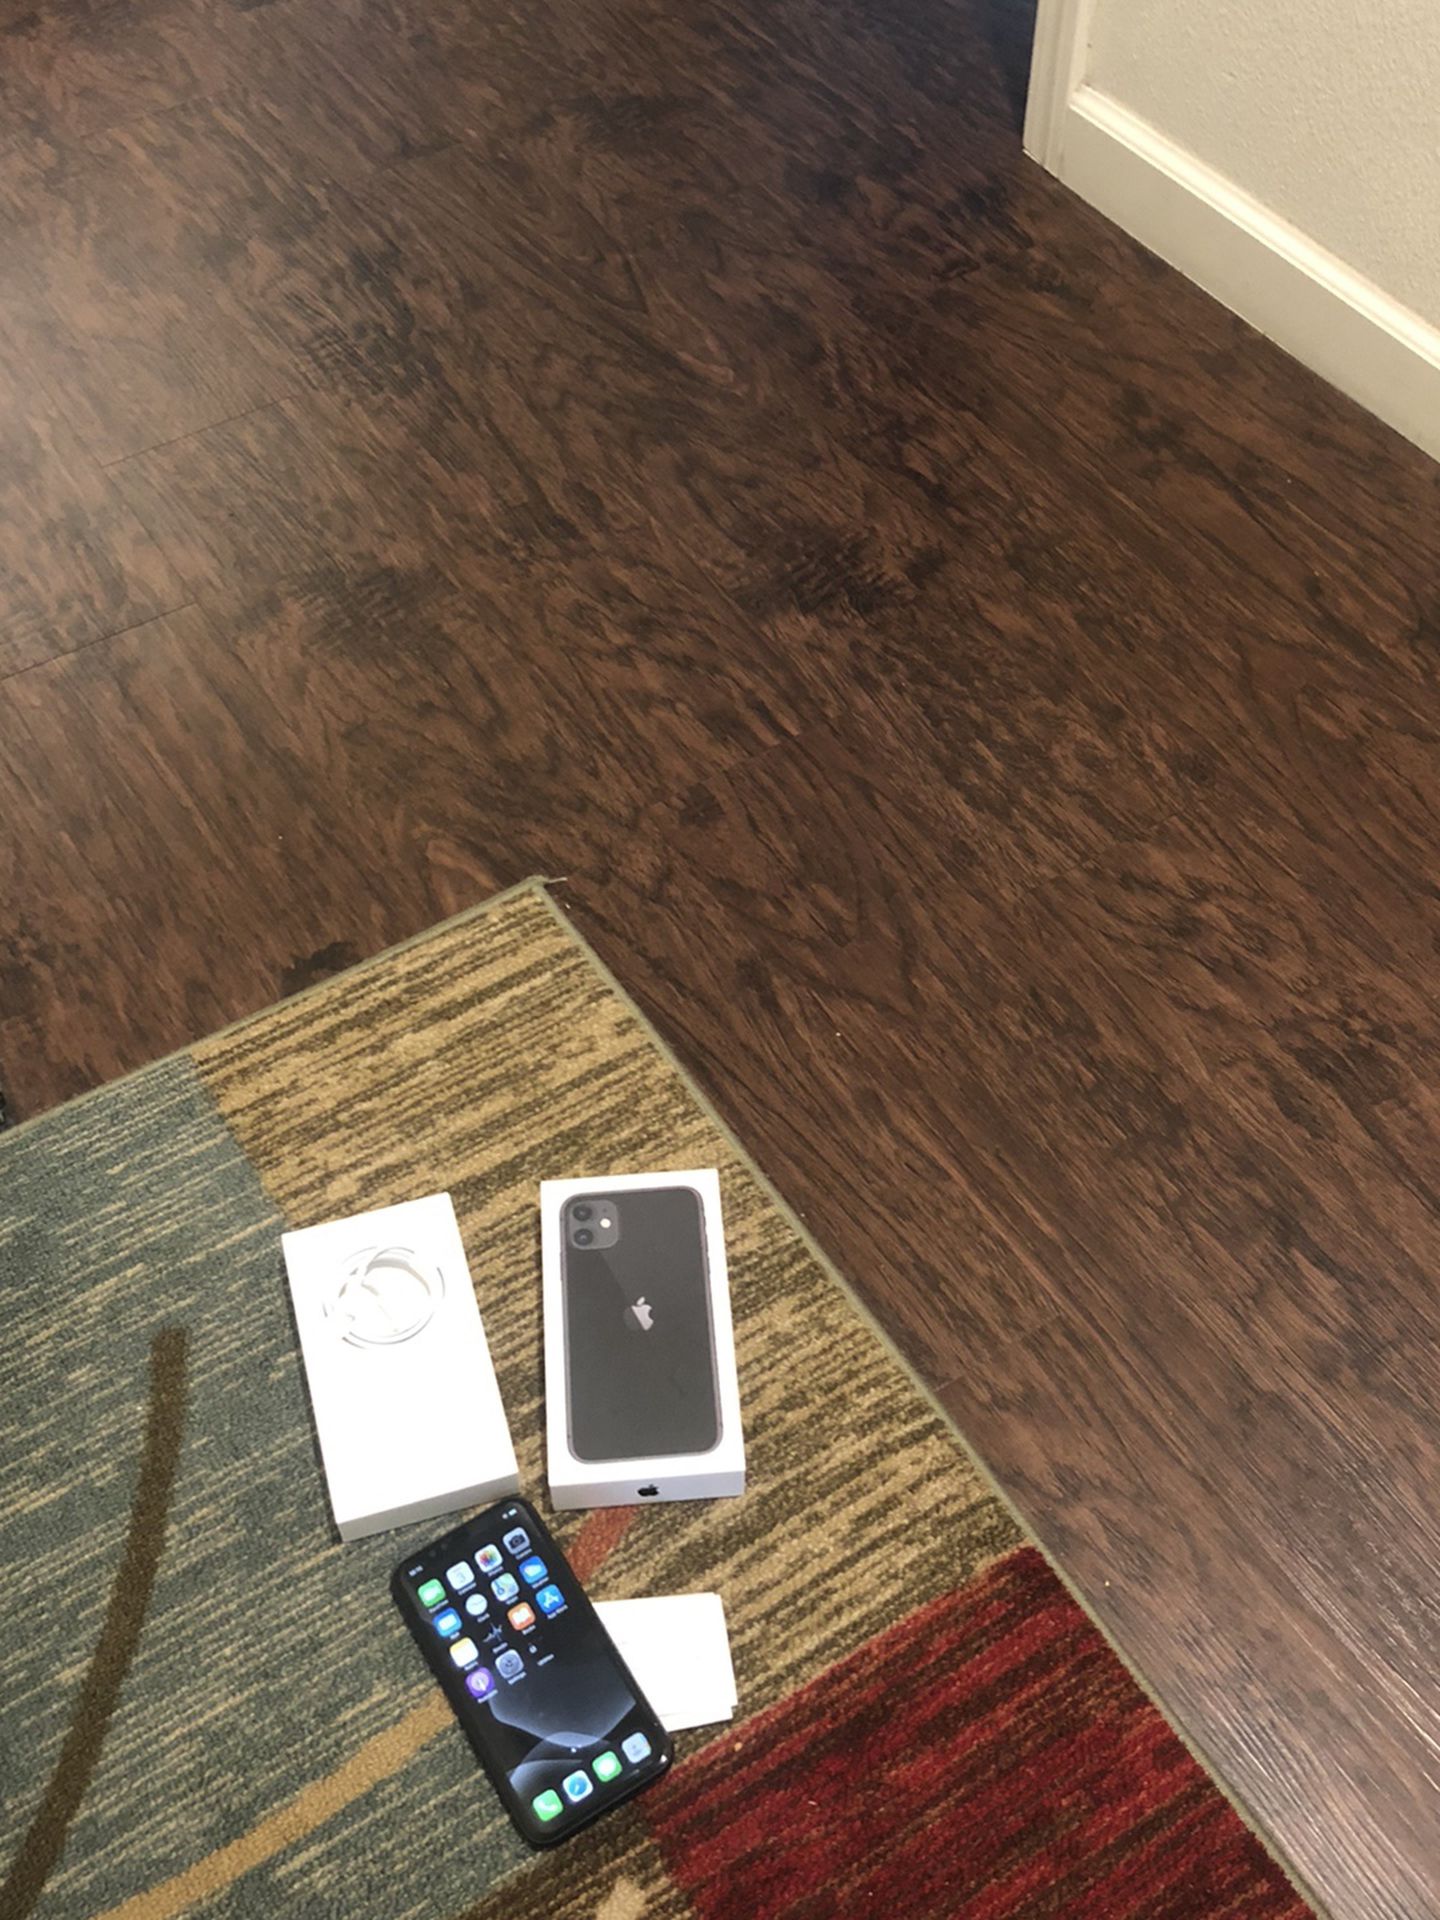 iPhone 11 64GB 🤤 (ATTENTION 4 Months Old!!) 🤭🕵️‍♀️ Pick Up Only $475 No Less 🥱